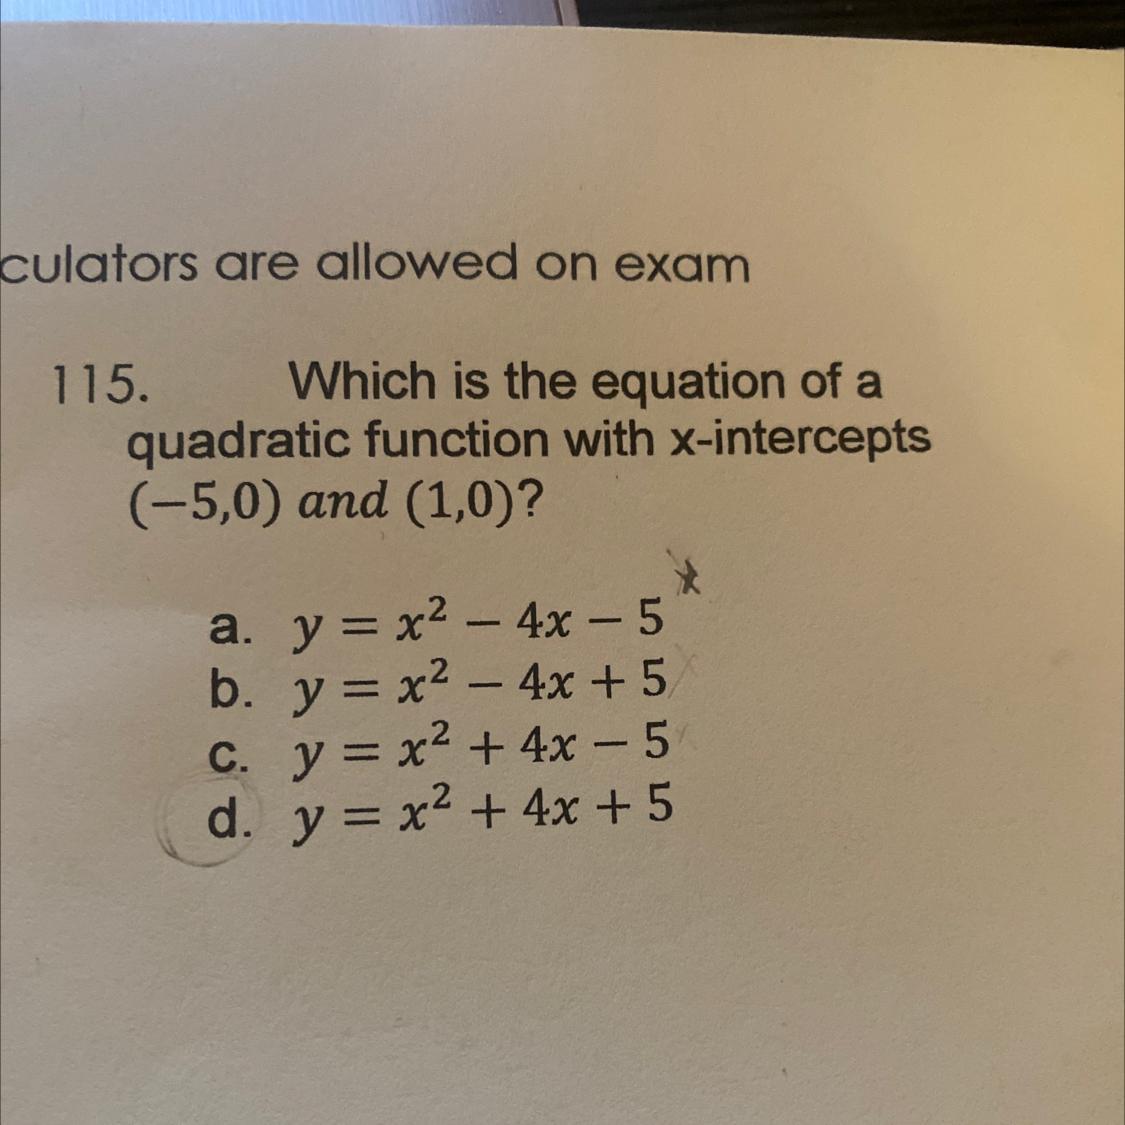 Ed On Exam115. Which Is The Equation Of Aquadratic Function With X-intercepts(-5,0) And (1,0)?a. Y =